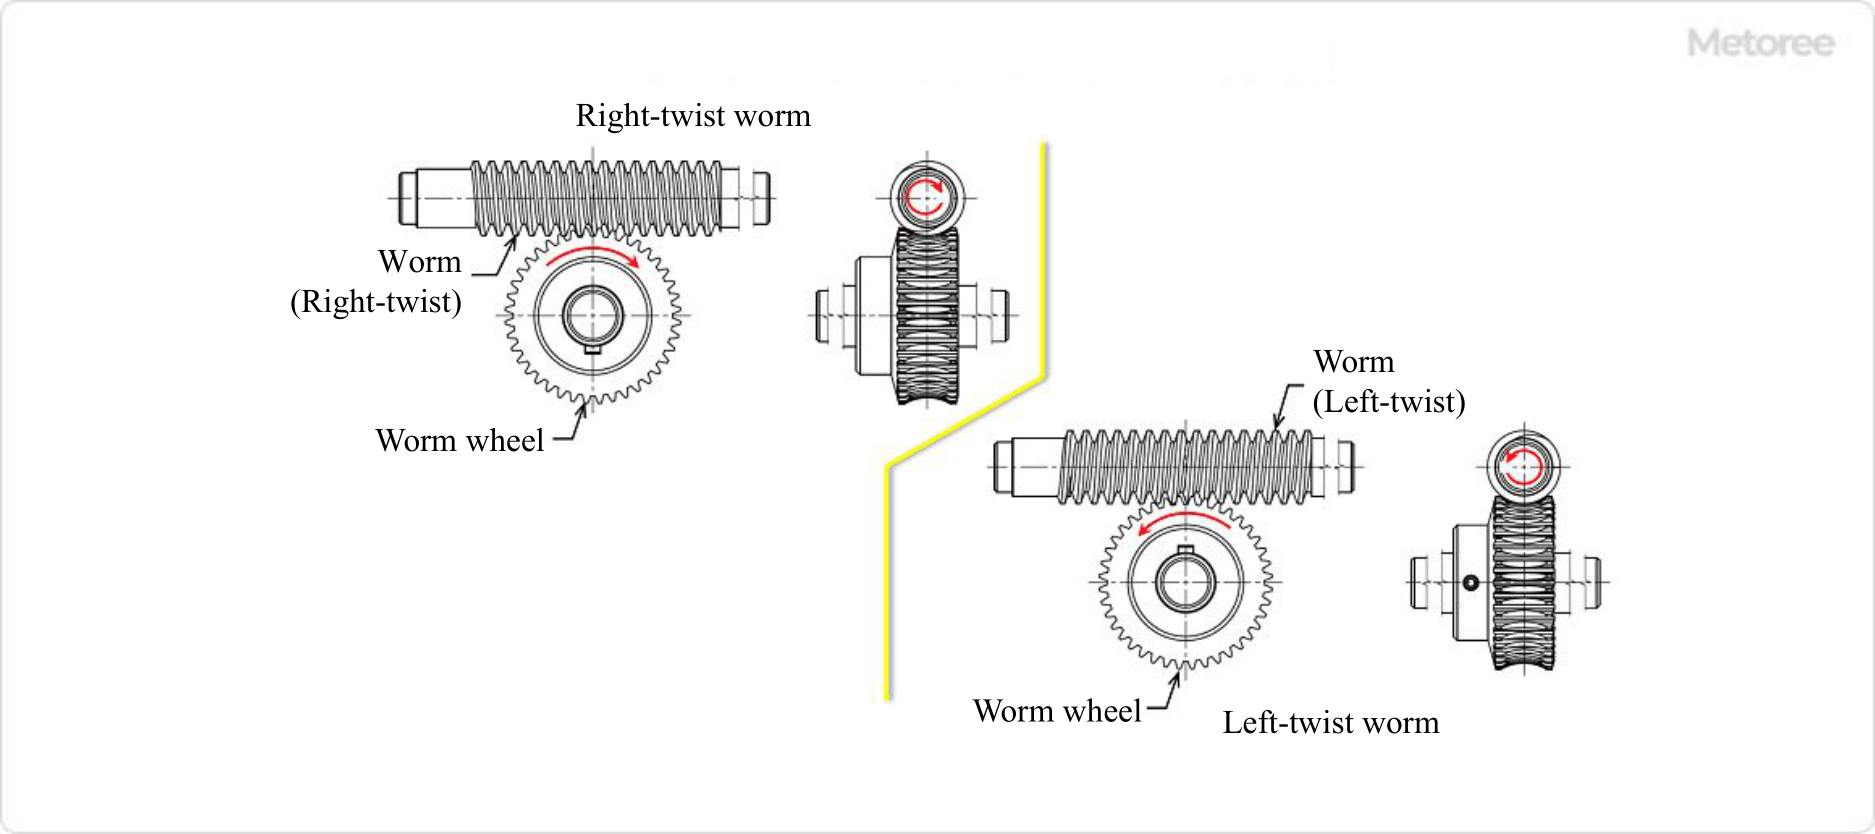 Figure 6. Direction of worm twist and worm wheel rotation